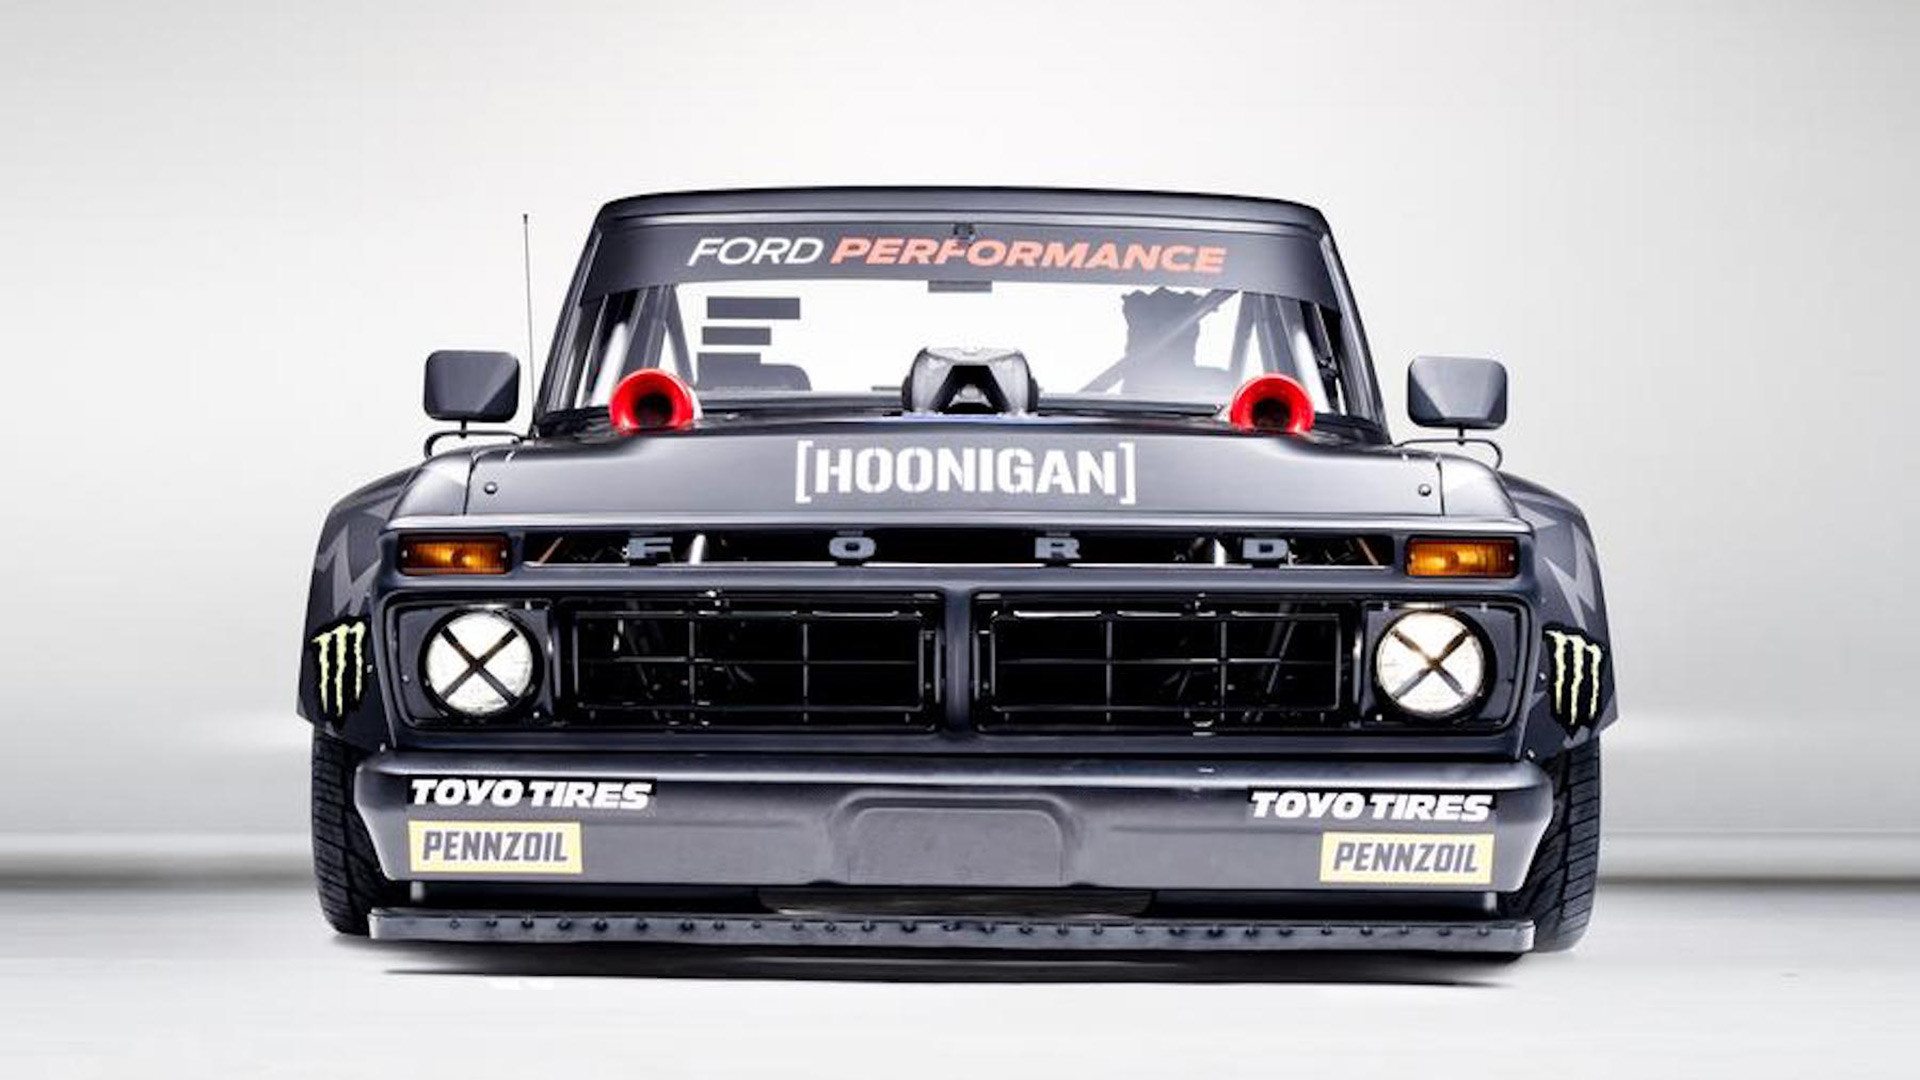 1920x1080 Ford engineers made history with special part for Ken Block's Hoonitruck